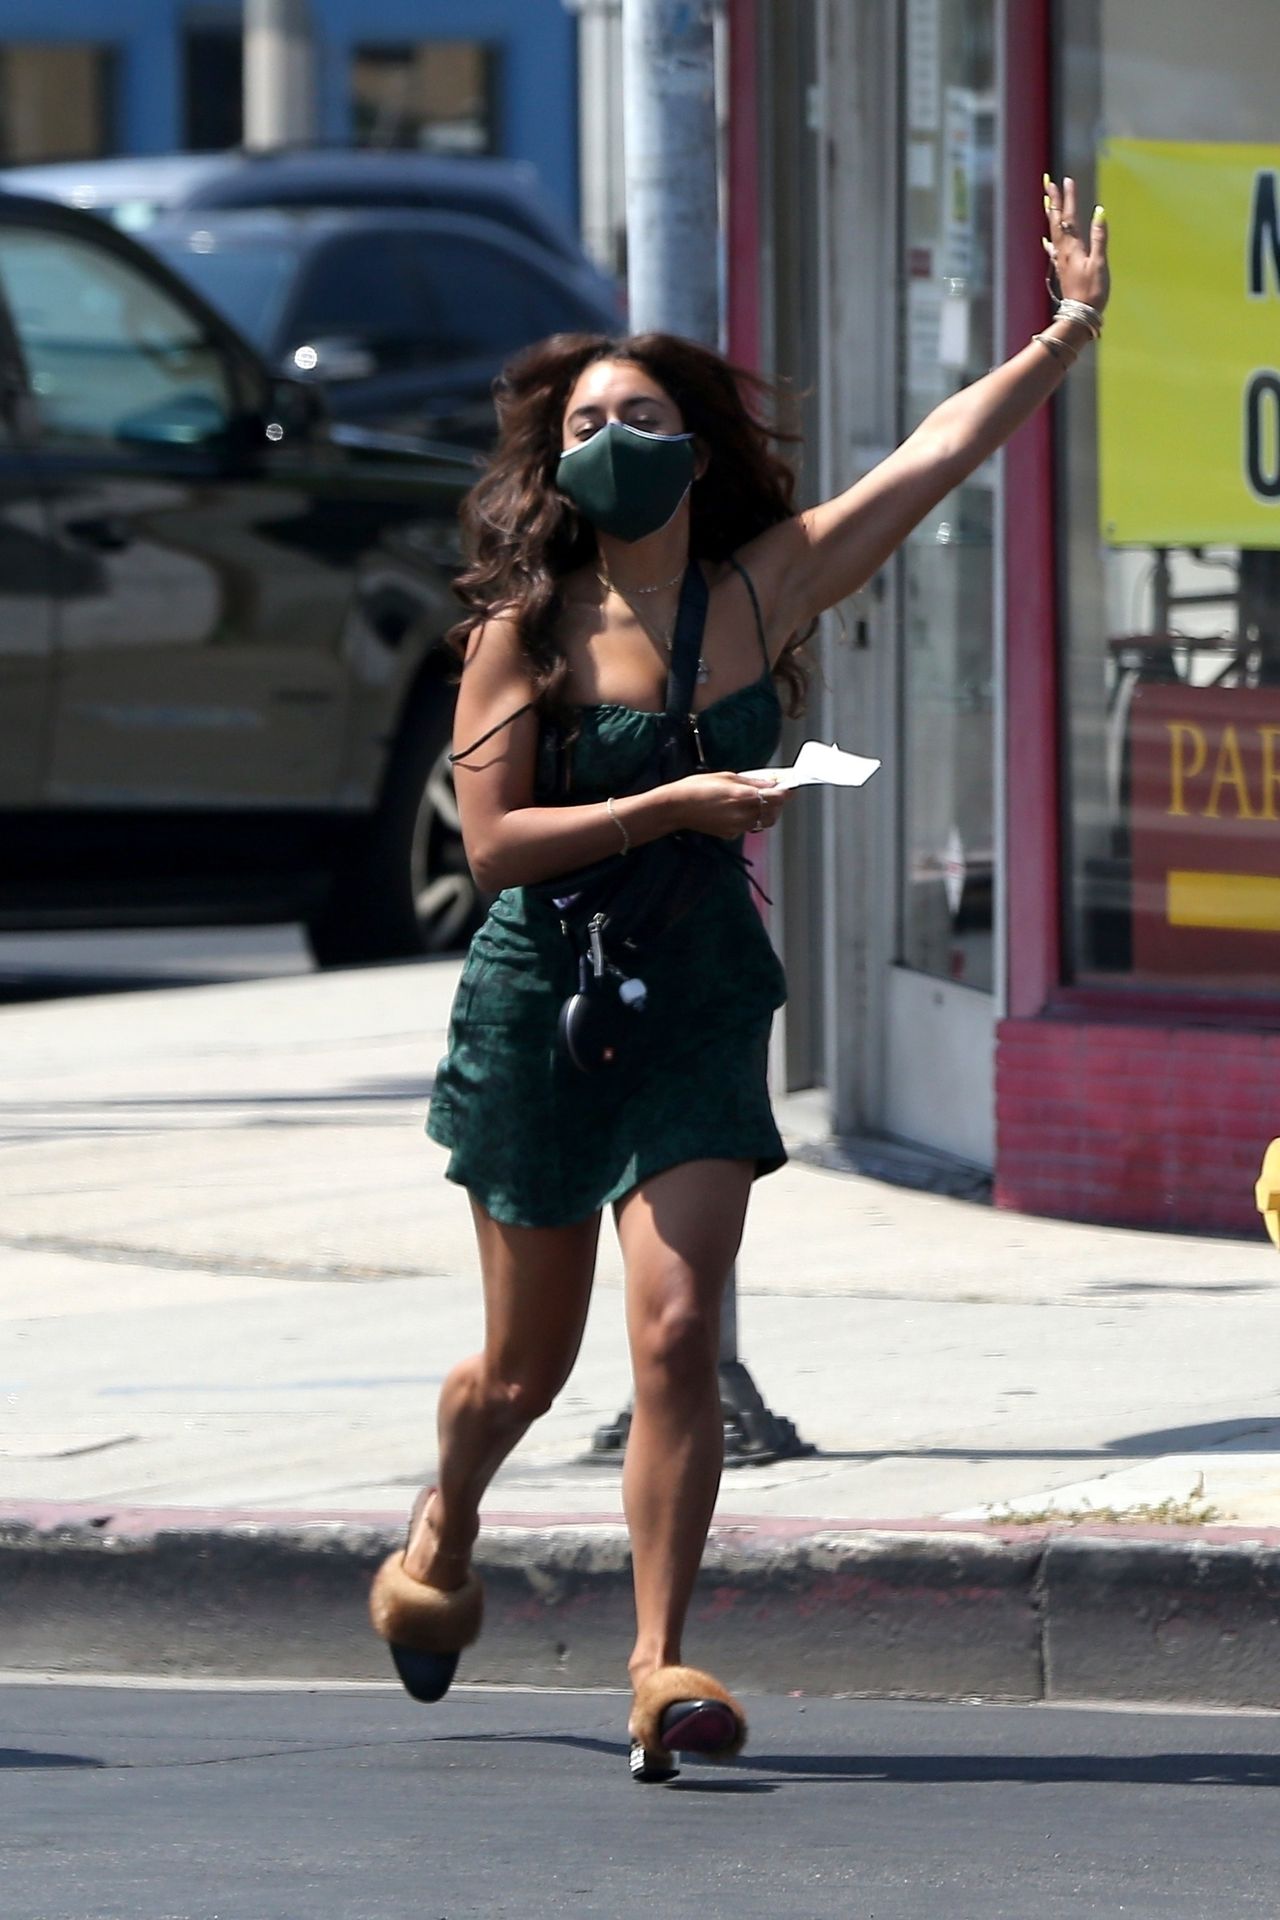 Vanessa Hudgens & GG Magree Make Their Last Shopping Trip at The Green Easy (66 Photos)